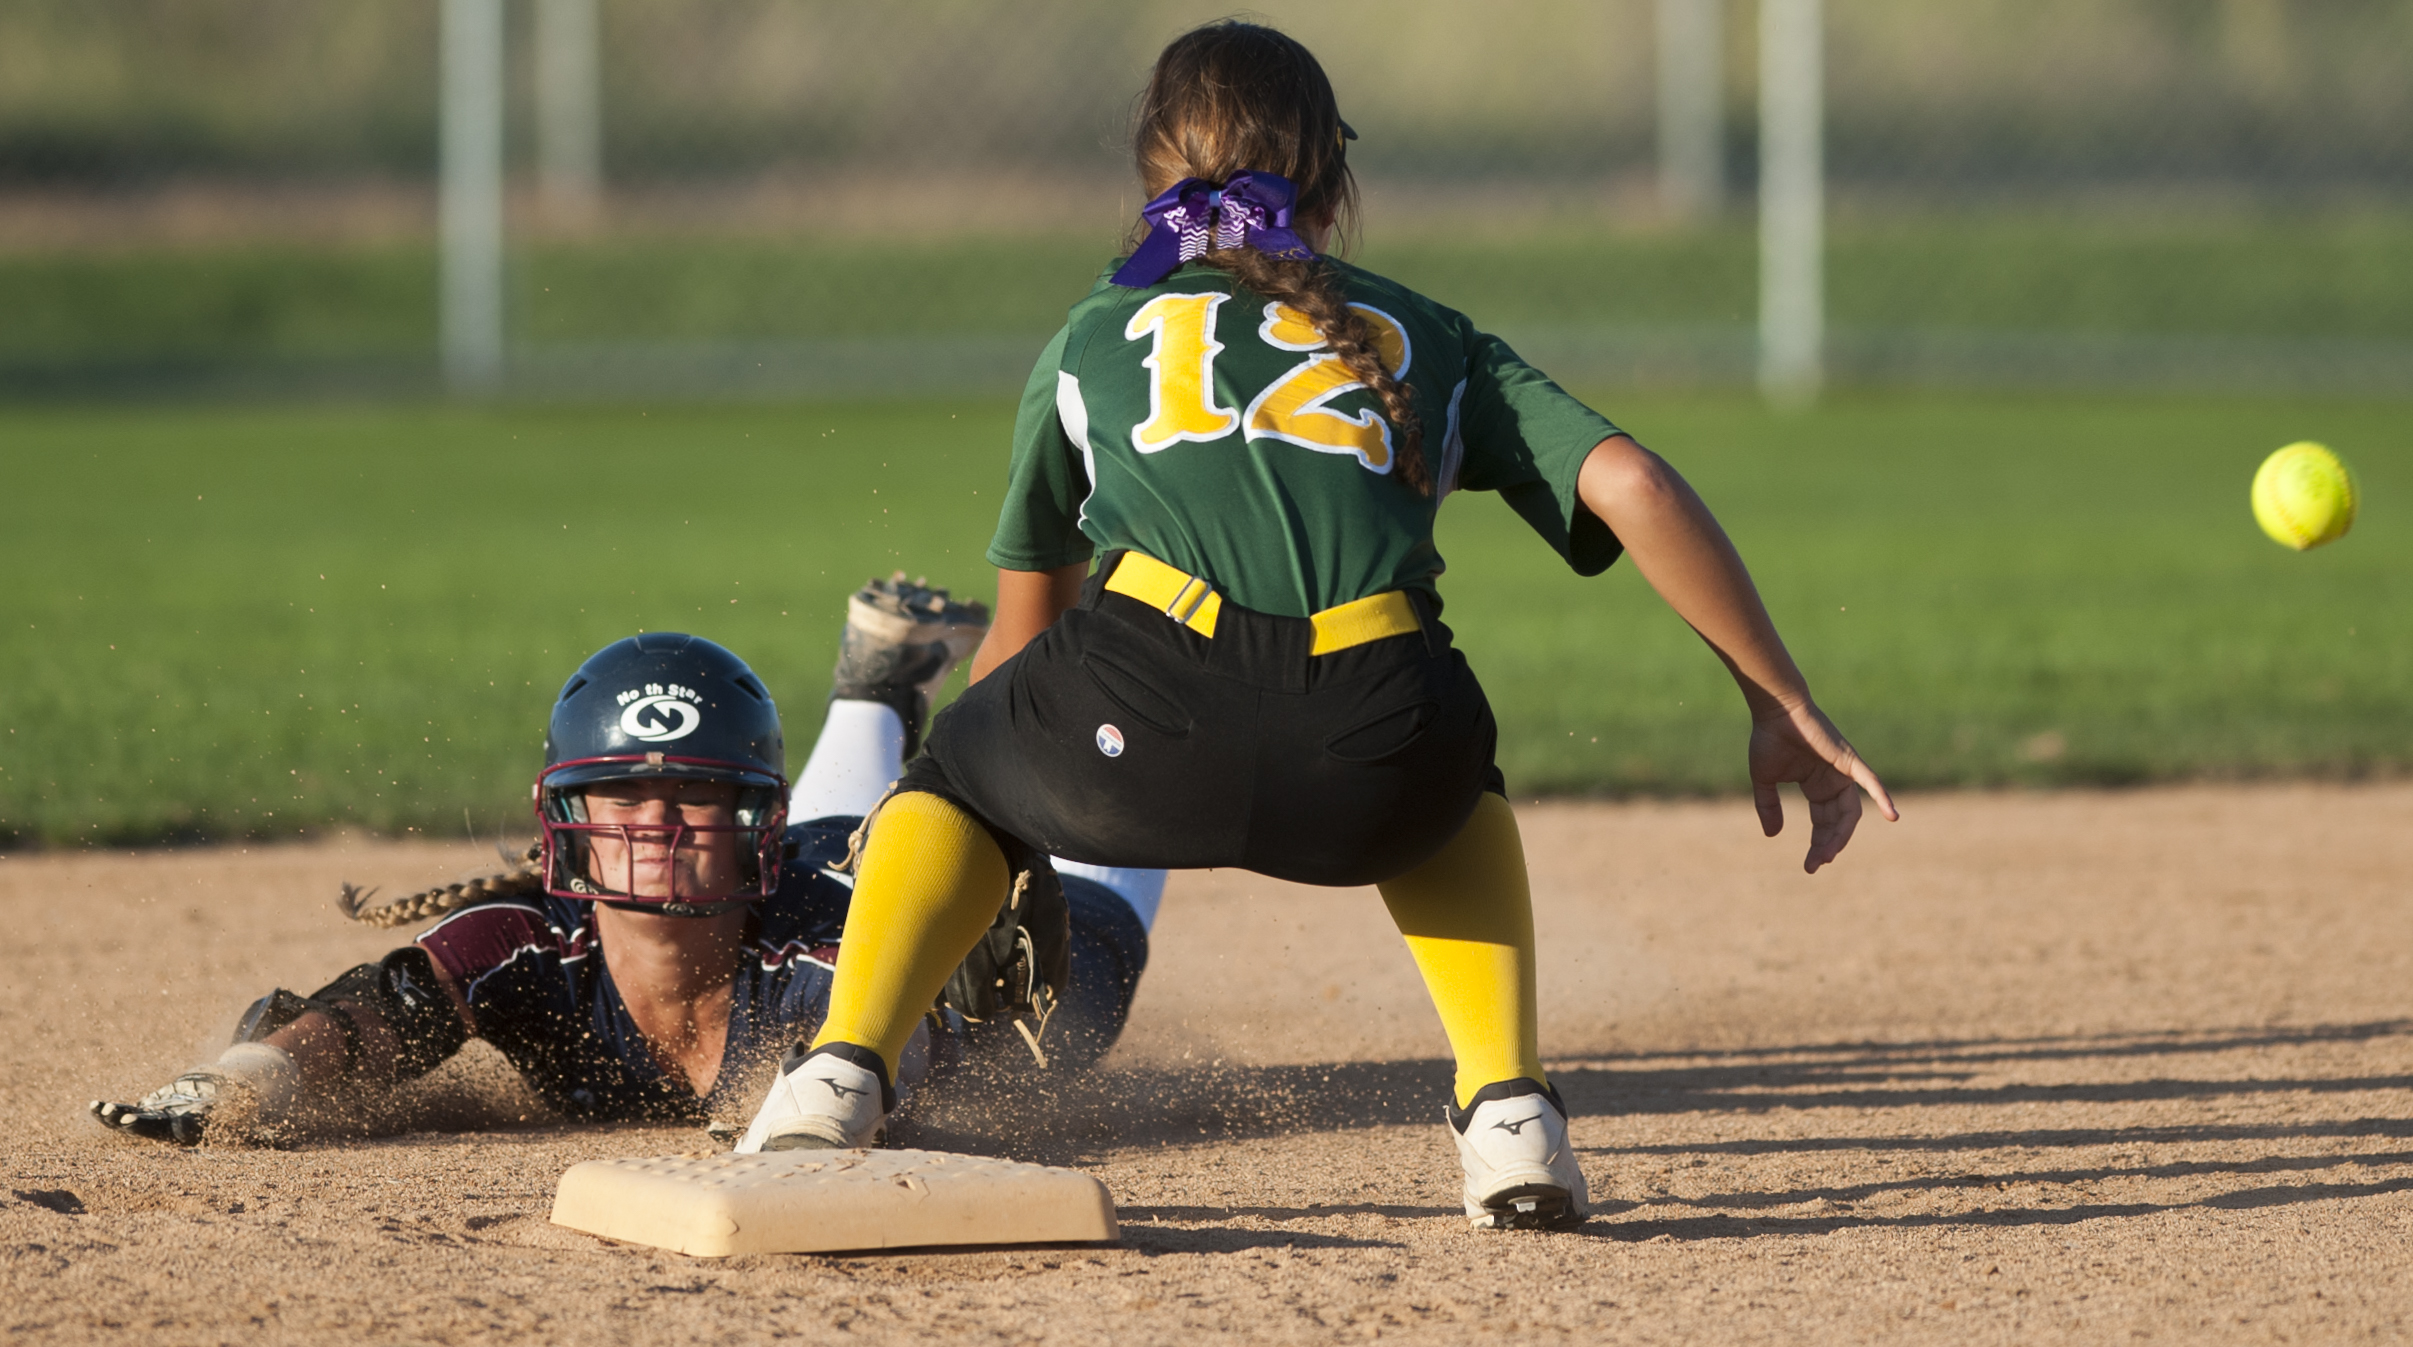  &nbsp;Following two errors during the play North Star's Elaina Mayer successfully slides into second base on a bunt before Pius X's MacKenzie Helman (12) can make the tag in the fifth inning of action Monday Sept. 21, 2015 at Doris Bair Softball Com